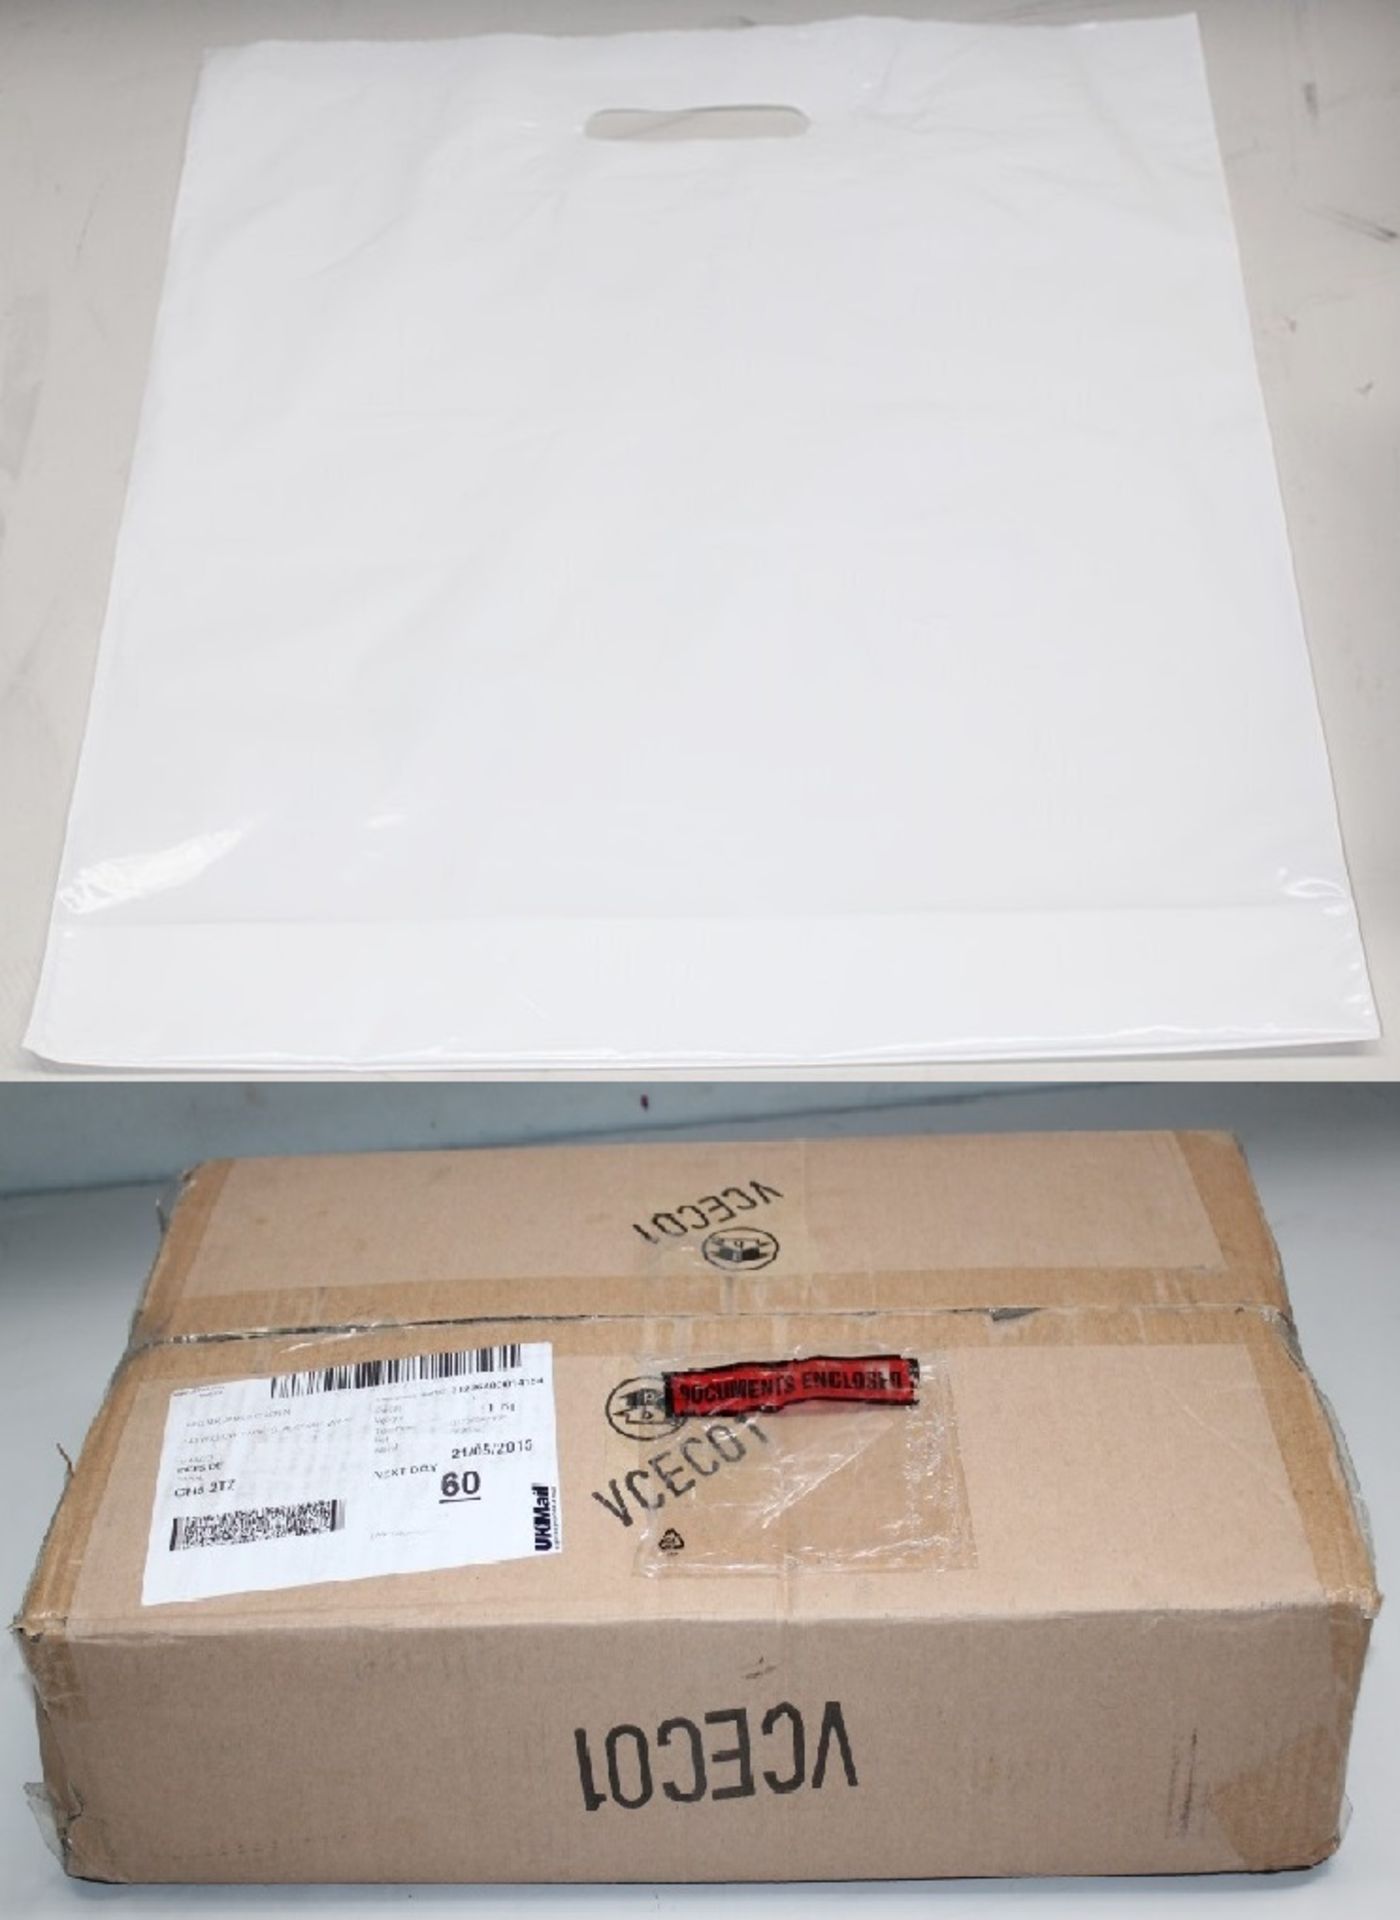 2 x Boxes Of White Carrier Bags  - A Total Of 2500 Bags - New, Unused Boxed Stock - Ref: JIM073 -